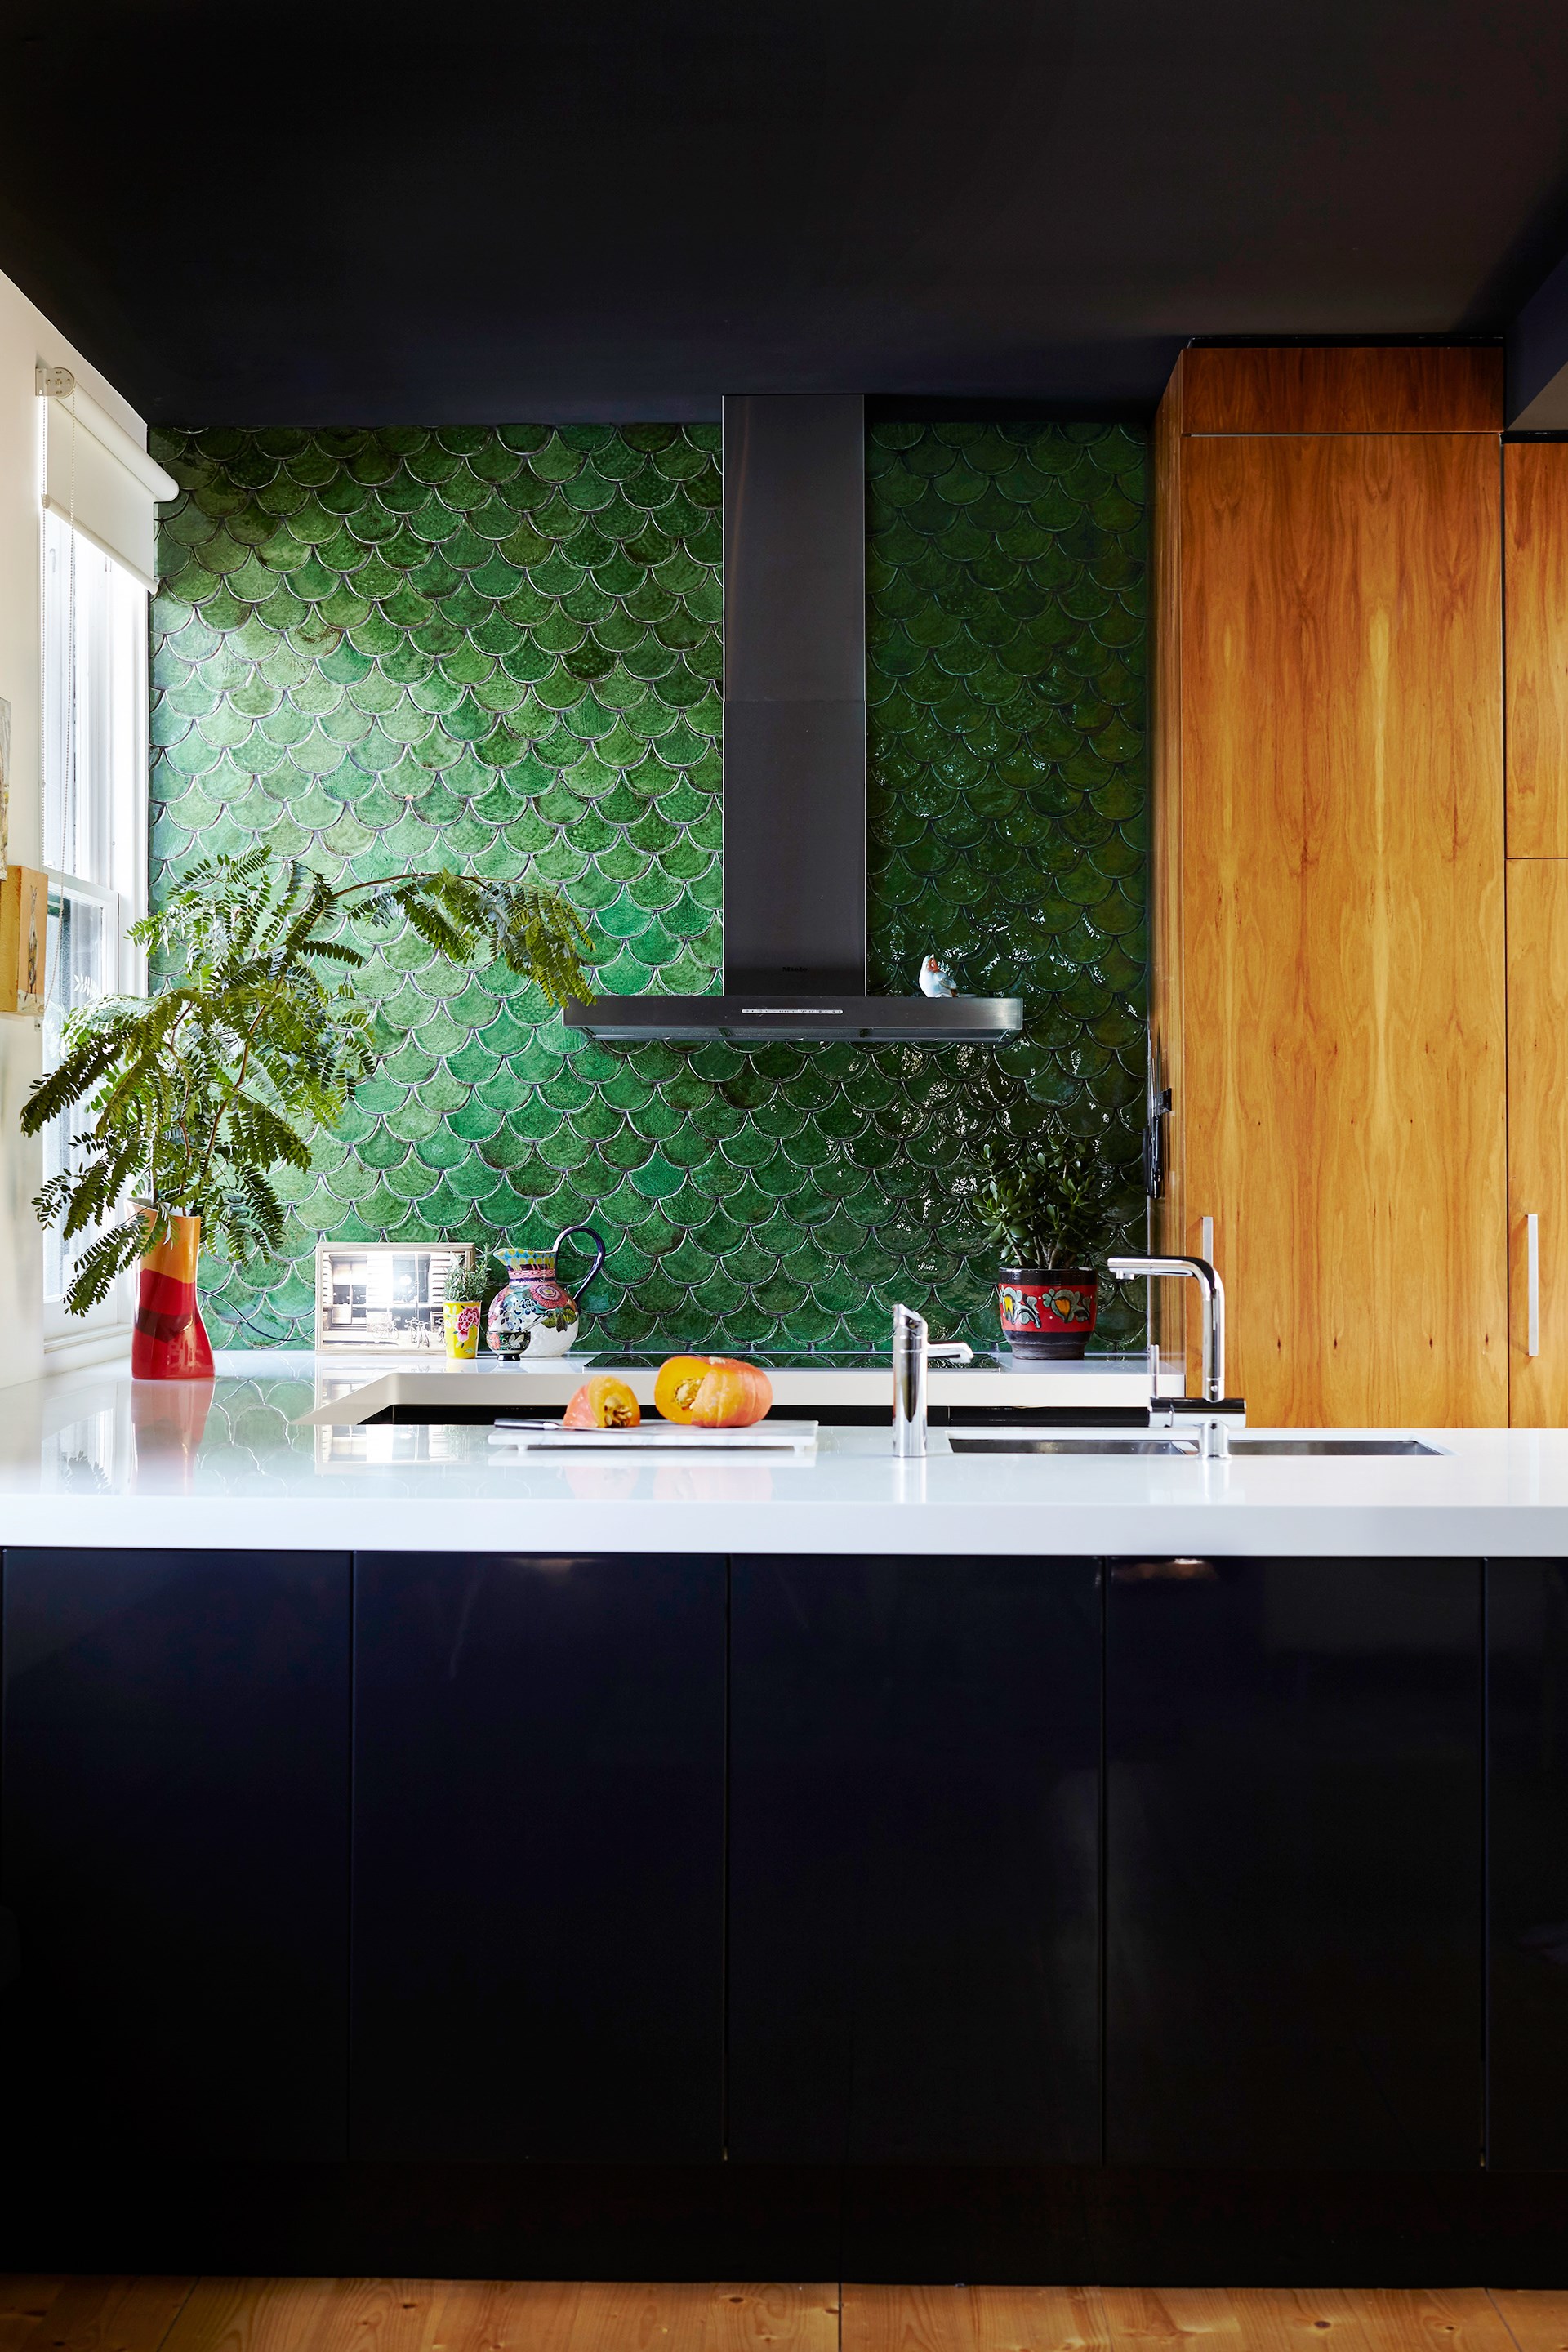 Olive-green fishscale-patterned tiles add character to the contemporary kitchen in this [Victorian home](http://www.homestolove.com.au/grand-victorian-home-gets-a-colourful-personality-3642|target="_blank"). Photo: Alicia Taylor